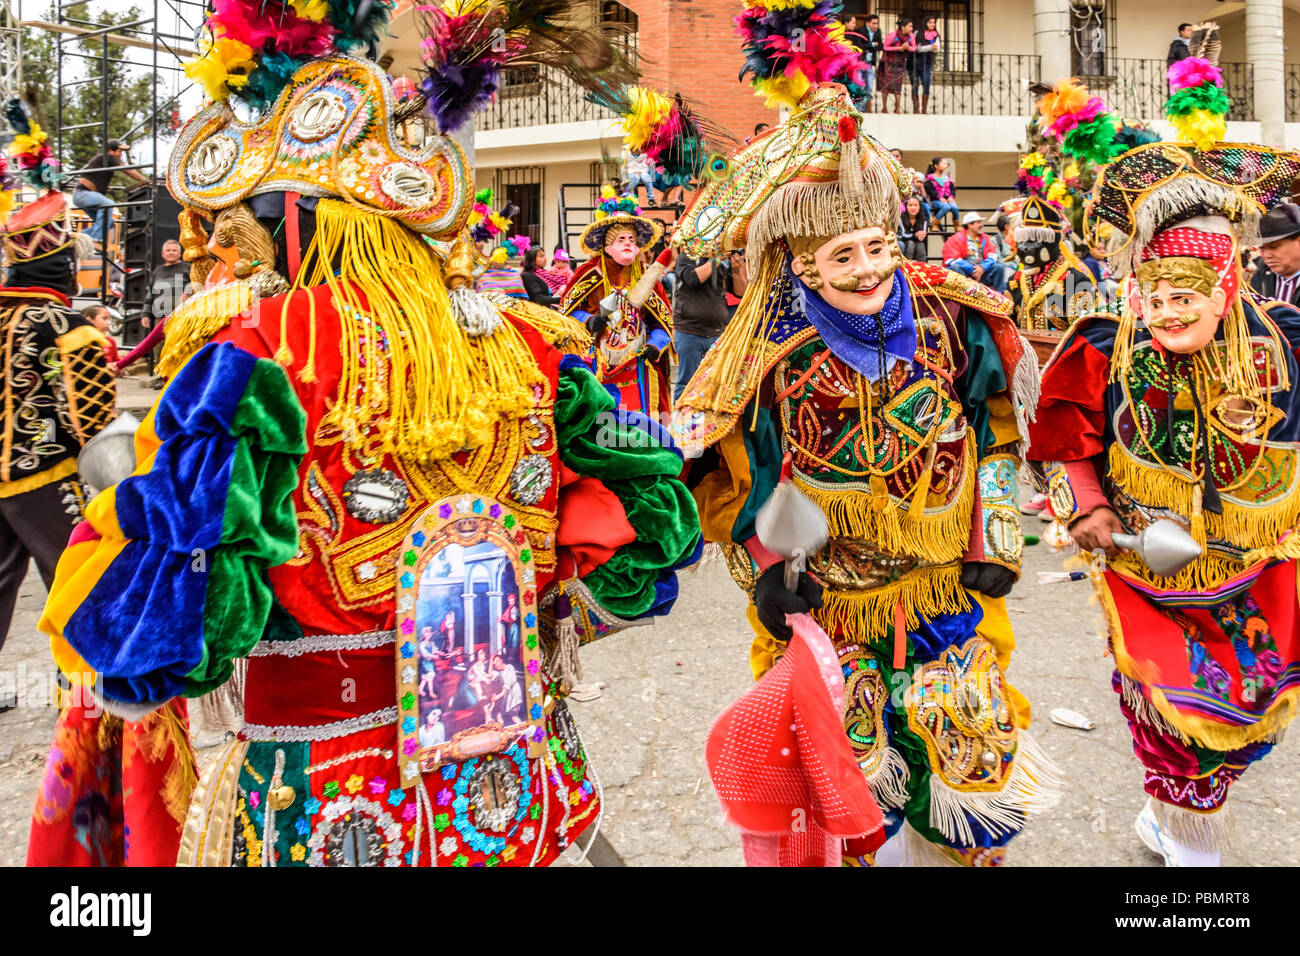 Parramos, Guatemala - December 28, 2016: Traditional folk dancers in mask & costume in Dance of the Moors & Christians near colonial Antigua. Stock Photo